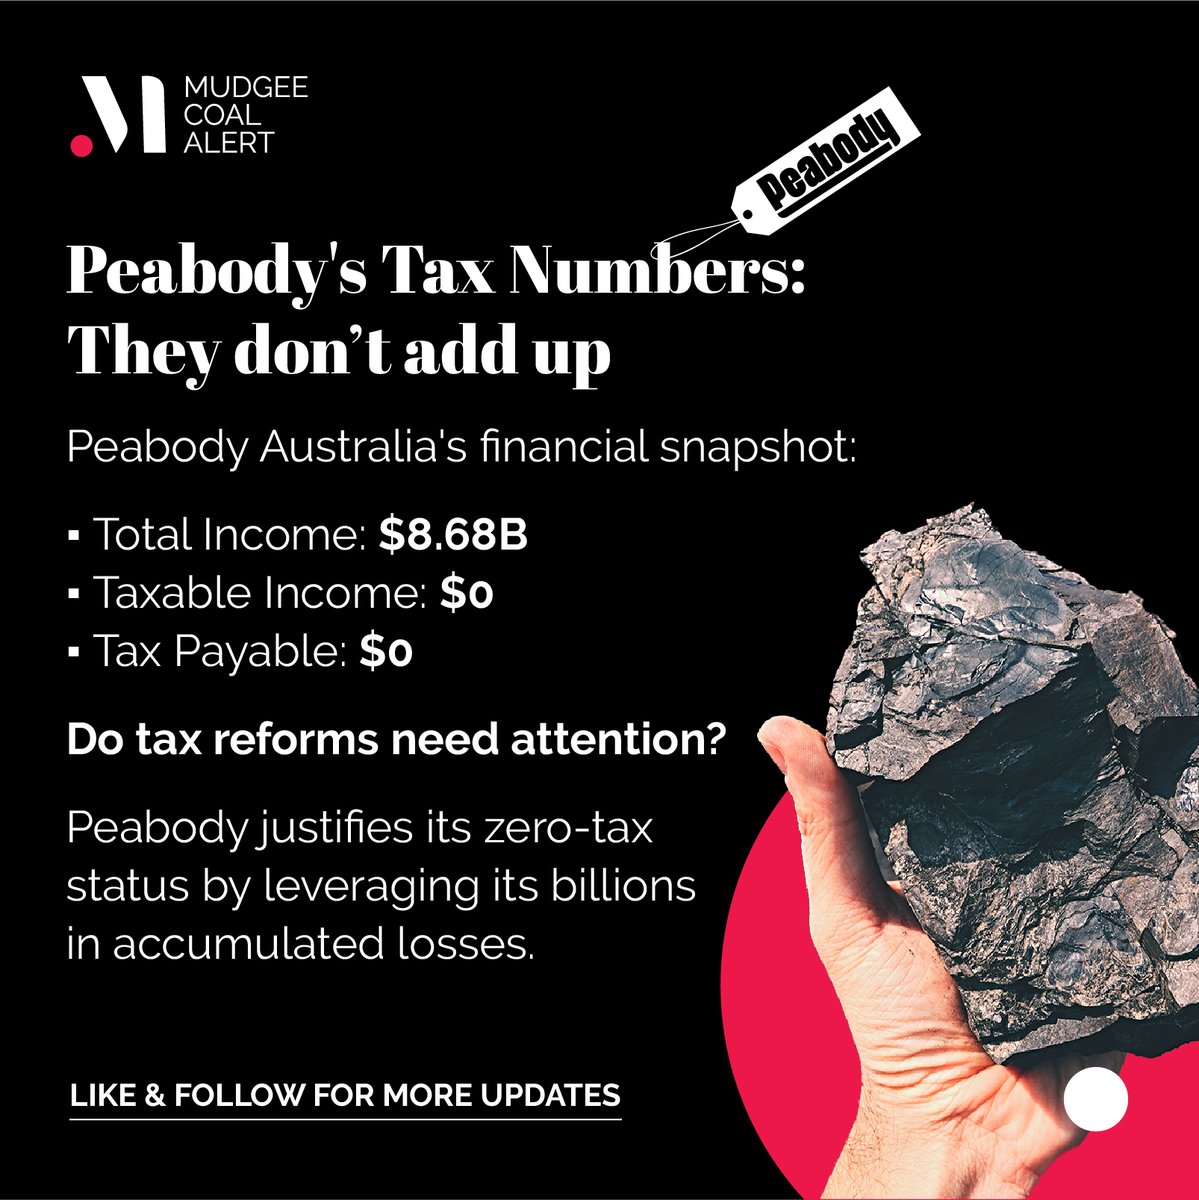 Why is Peabody exploring for more coal in the Wollar area if they are losing so much money? #Peabody #TaxDodging #Finance ref: michaelwest.com.au/peabody-austra…